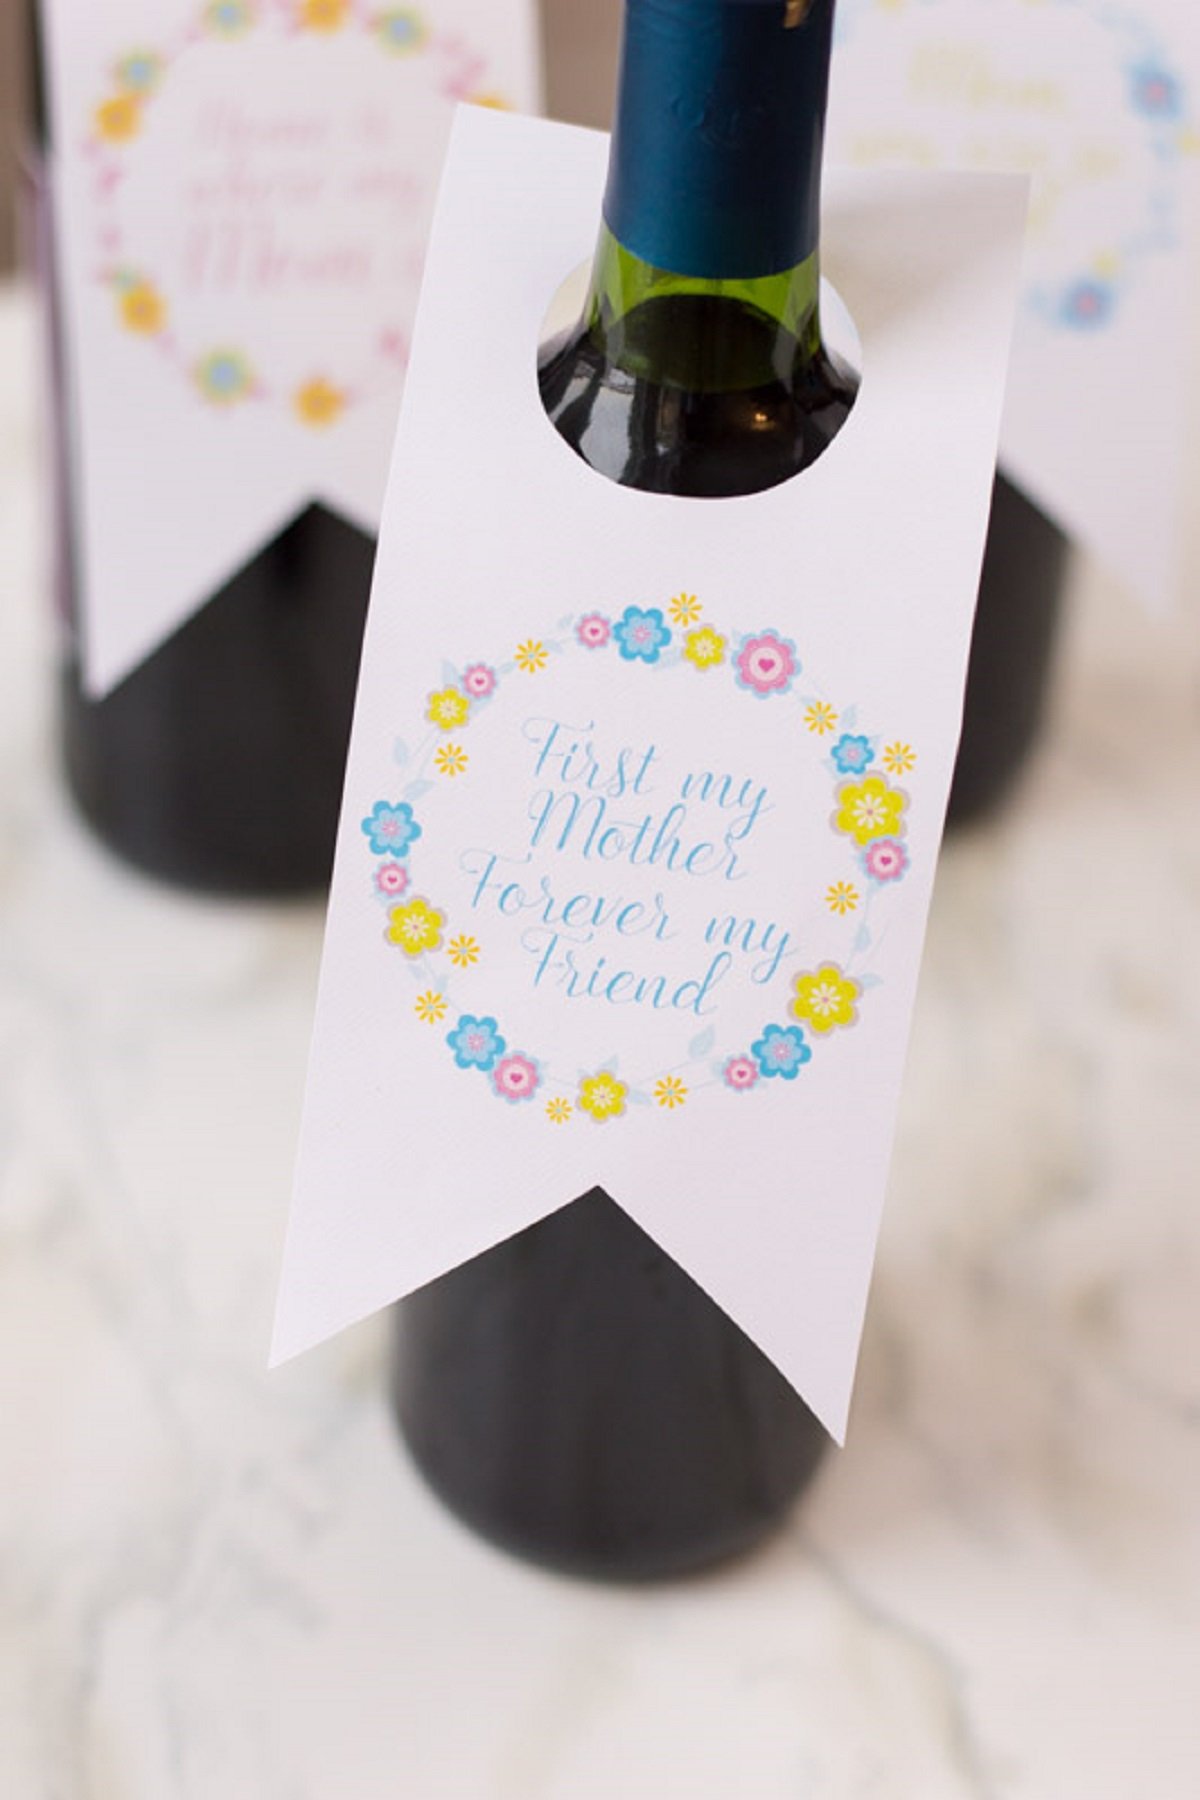 wine bottle with printable wine tag